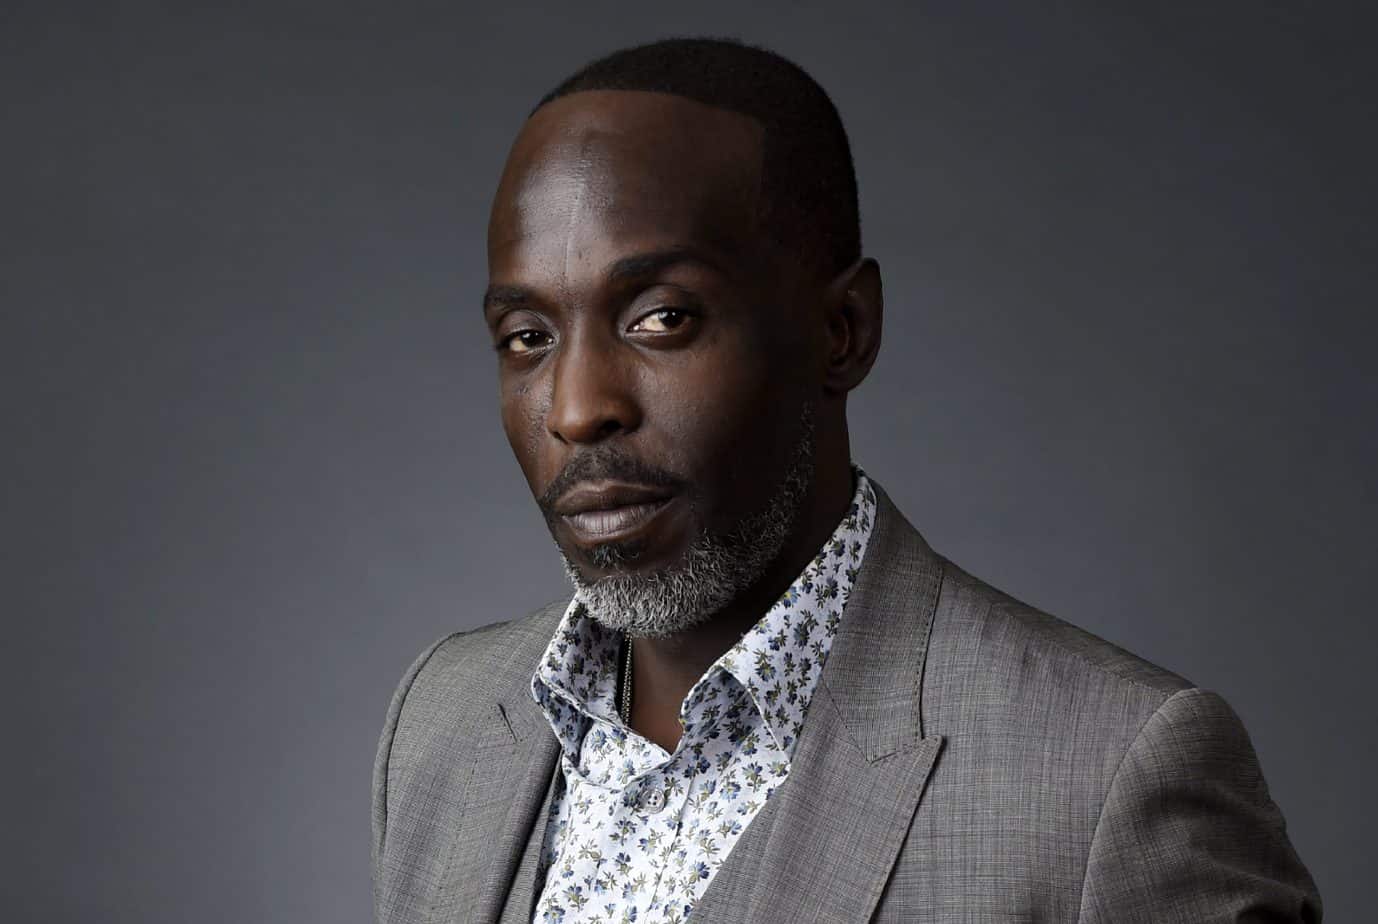 The sports world took to social media to react to the unexpected passing of "The Wire" actor Michael K. Williams, who was 54-years-old